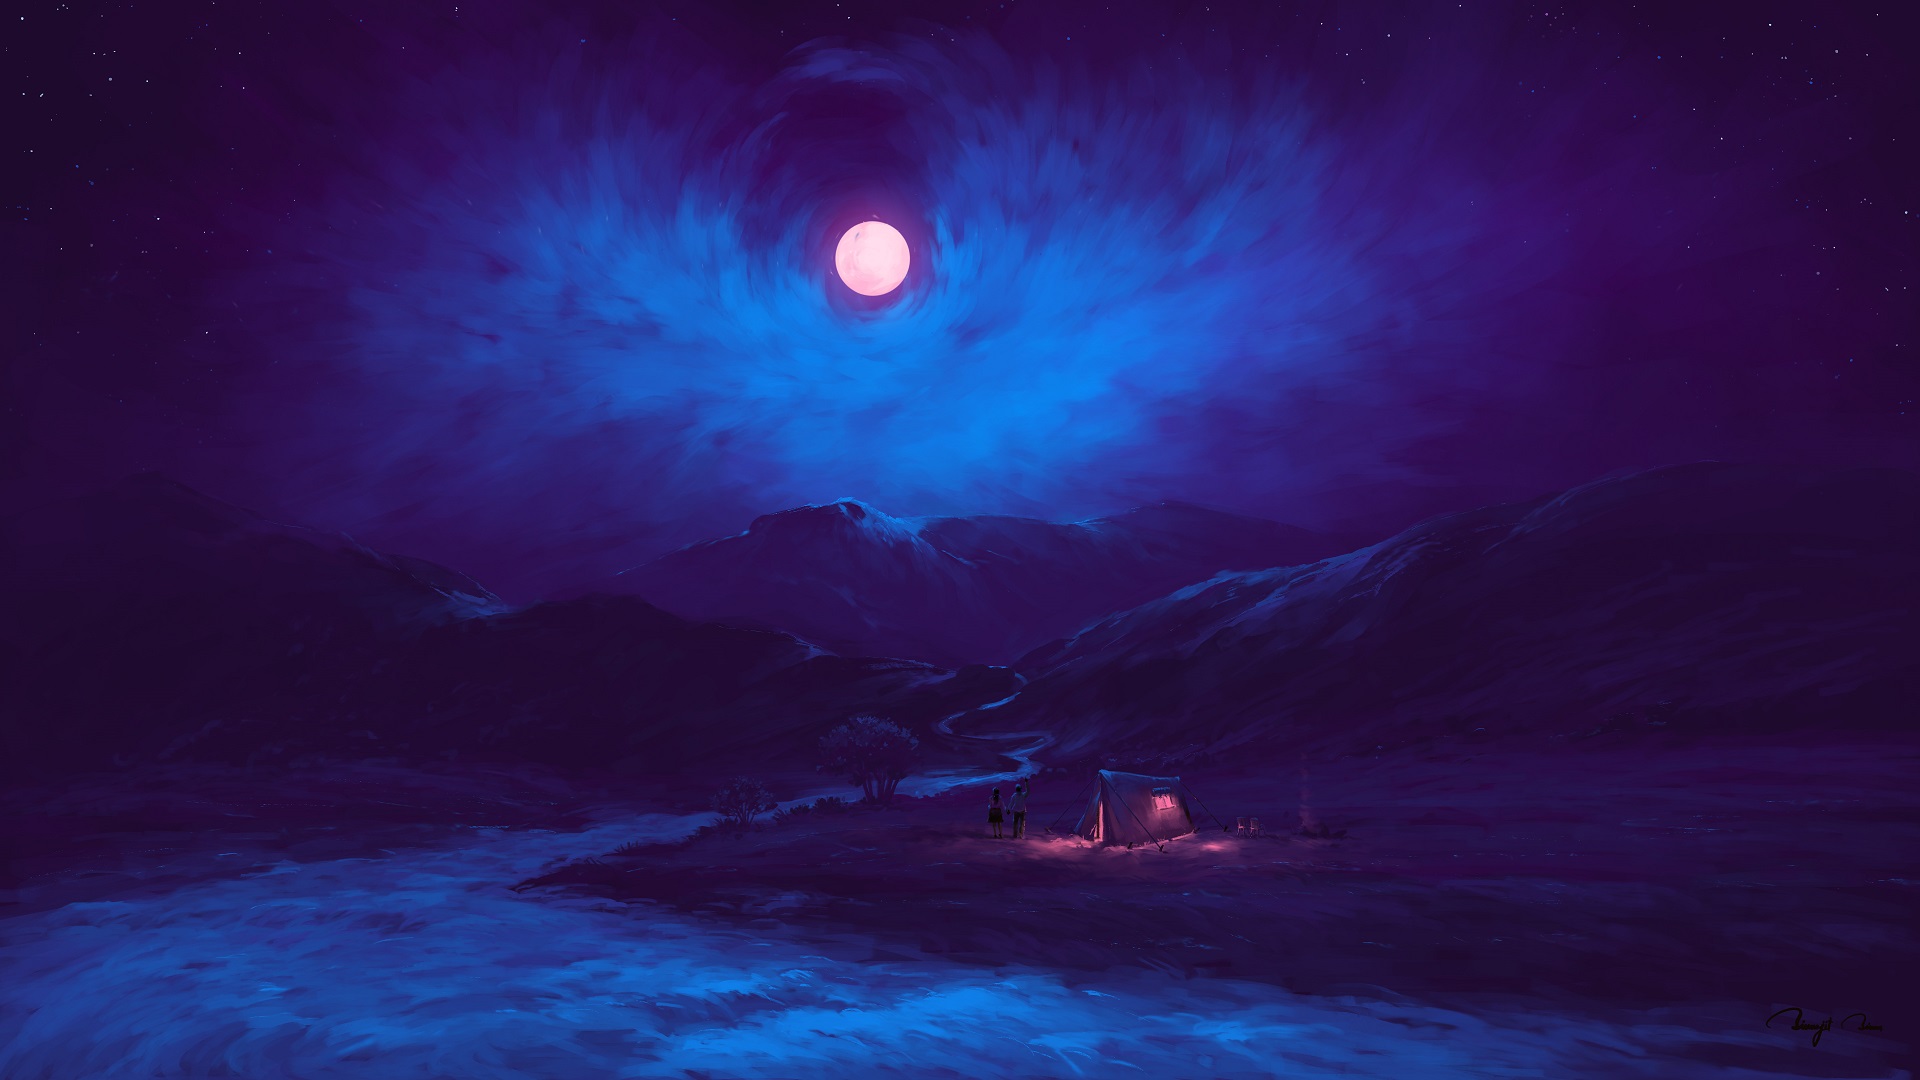 General 1920x1080 digital painting landscape night clouds Moon river mountains couple camp romantic BisBiswas blue purple